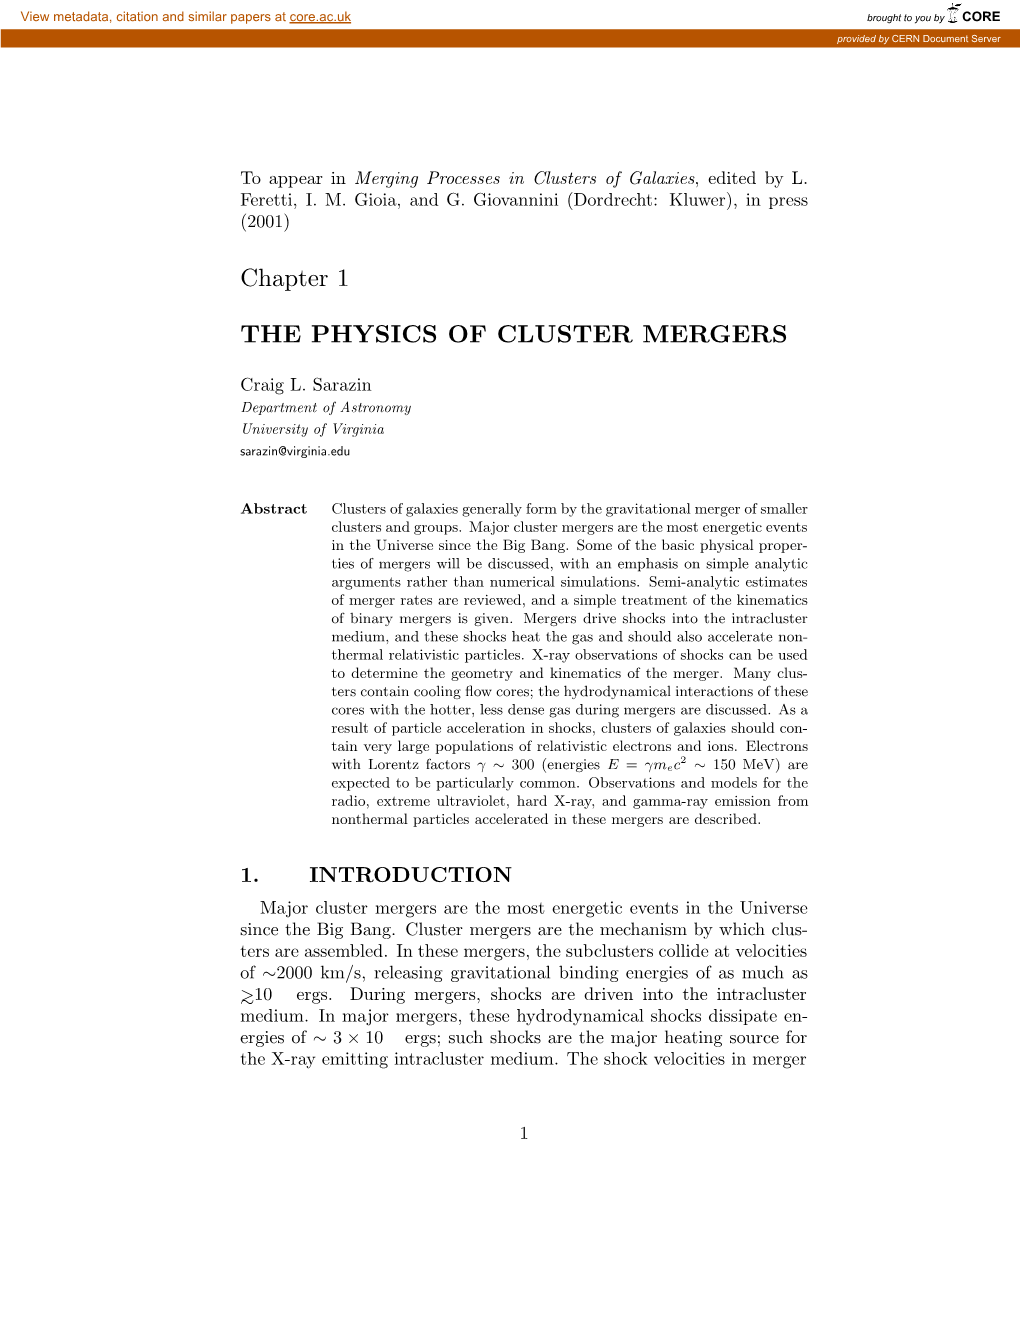 Chapter 1 the PHYSICS of CLUSTER MERGERS